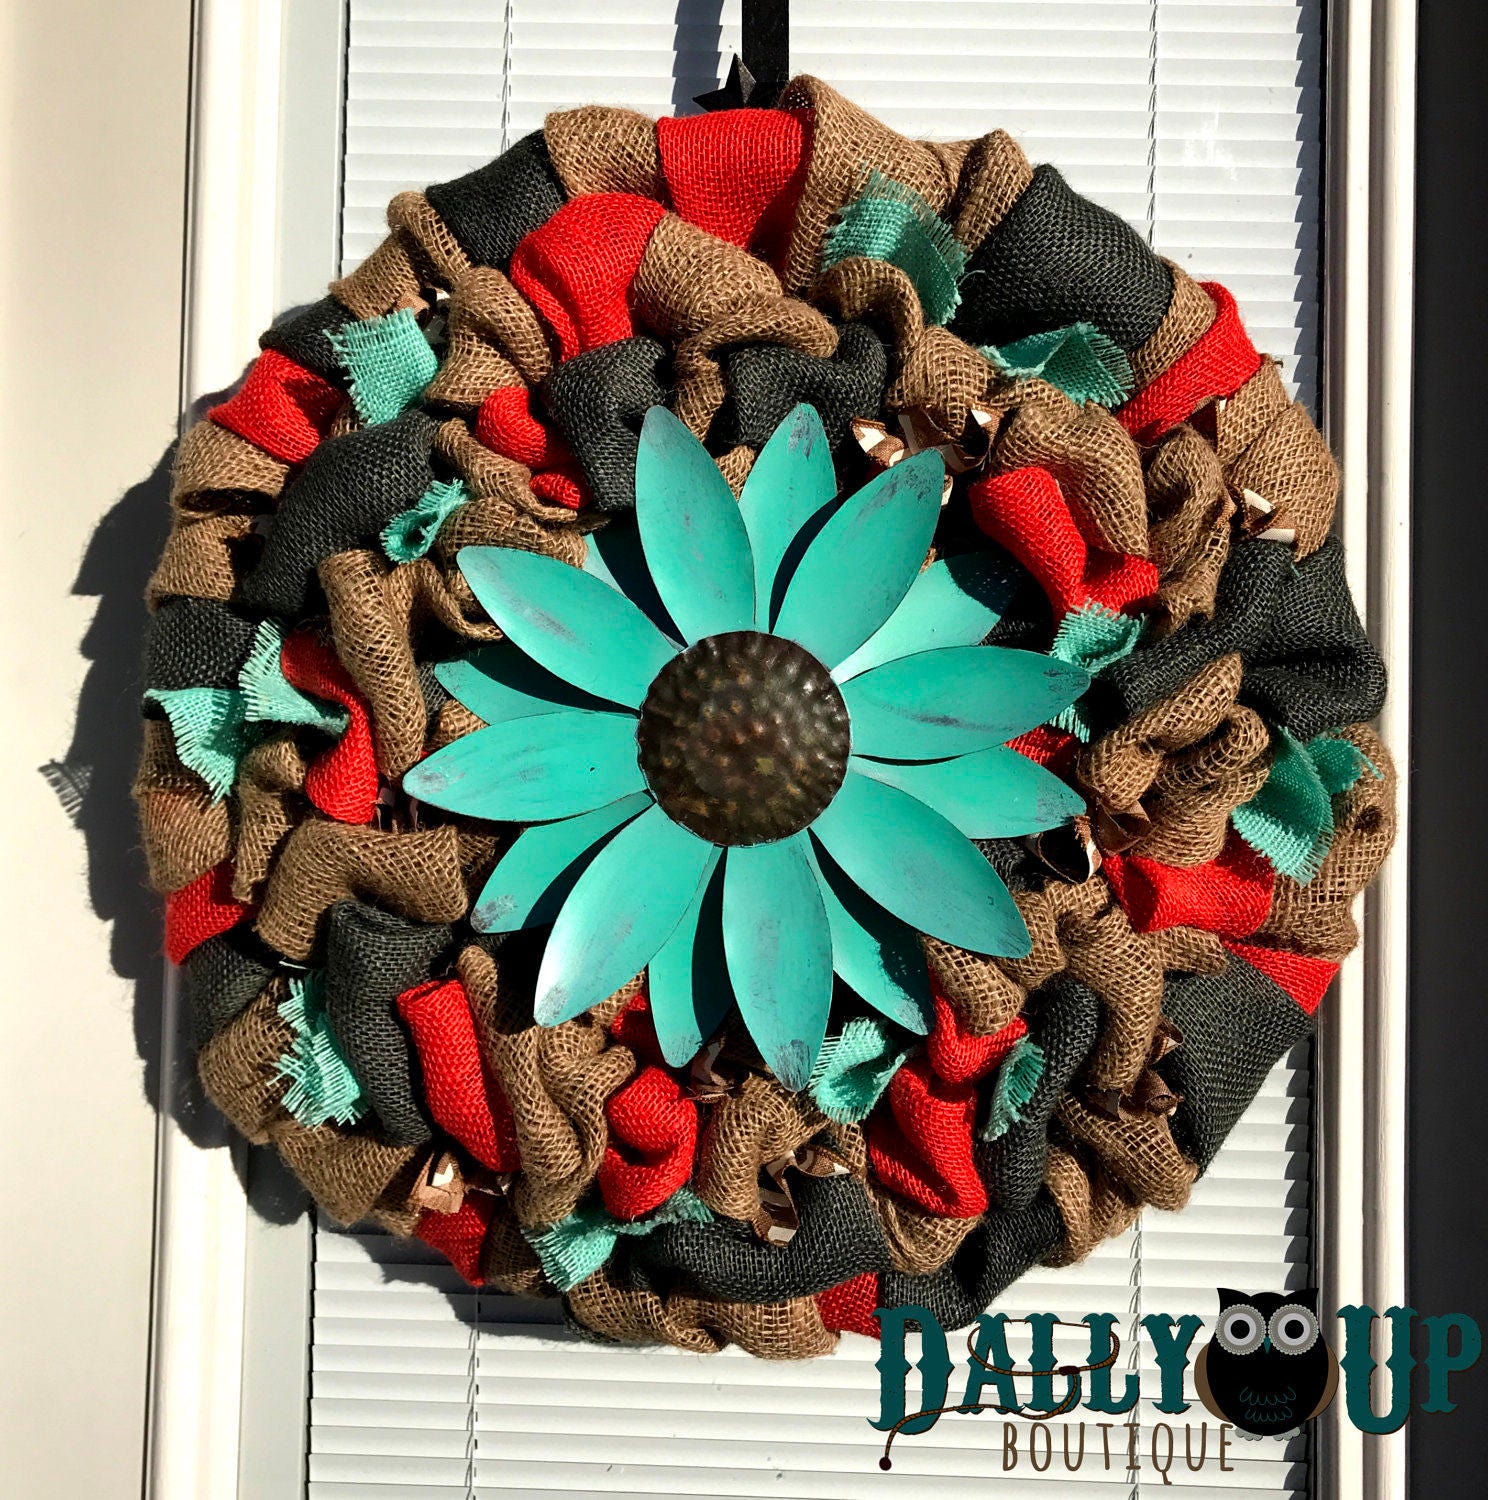 Wreath - Flower Spring Wreath -Coral, Gray and Aqua Wreath - Door Decor -  Spring Decor -  Front Door Wreath  -  Wreaths - Everyday Wreath